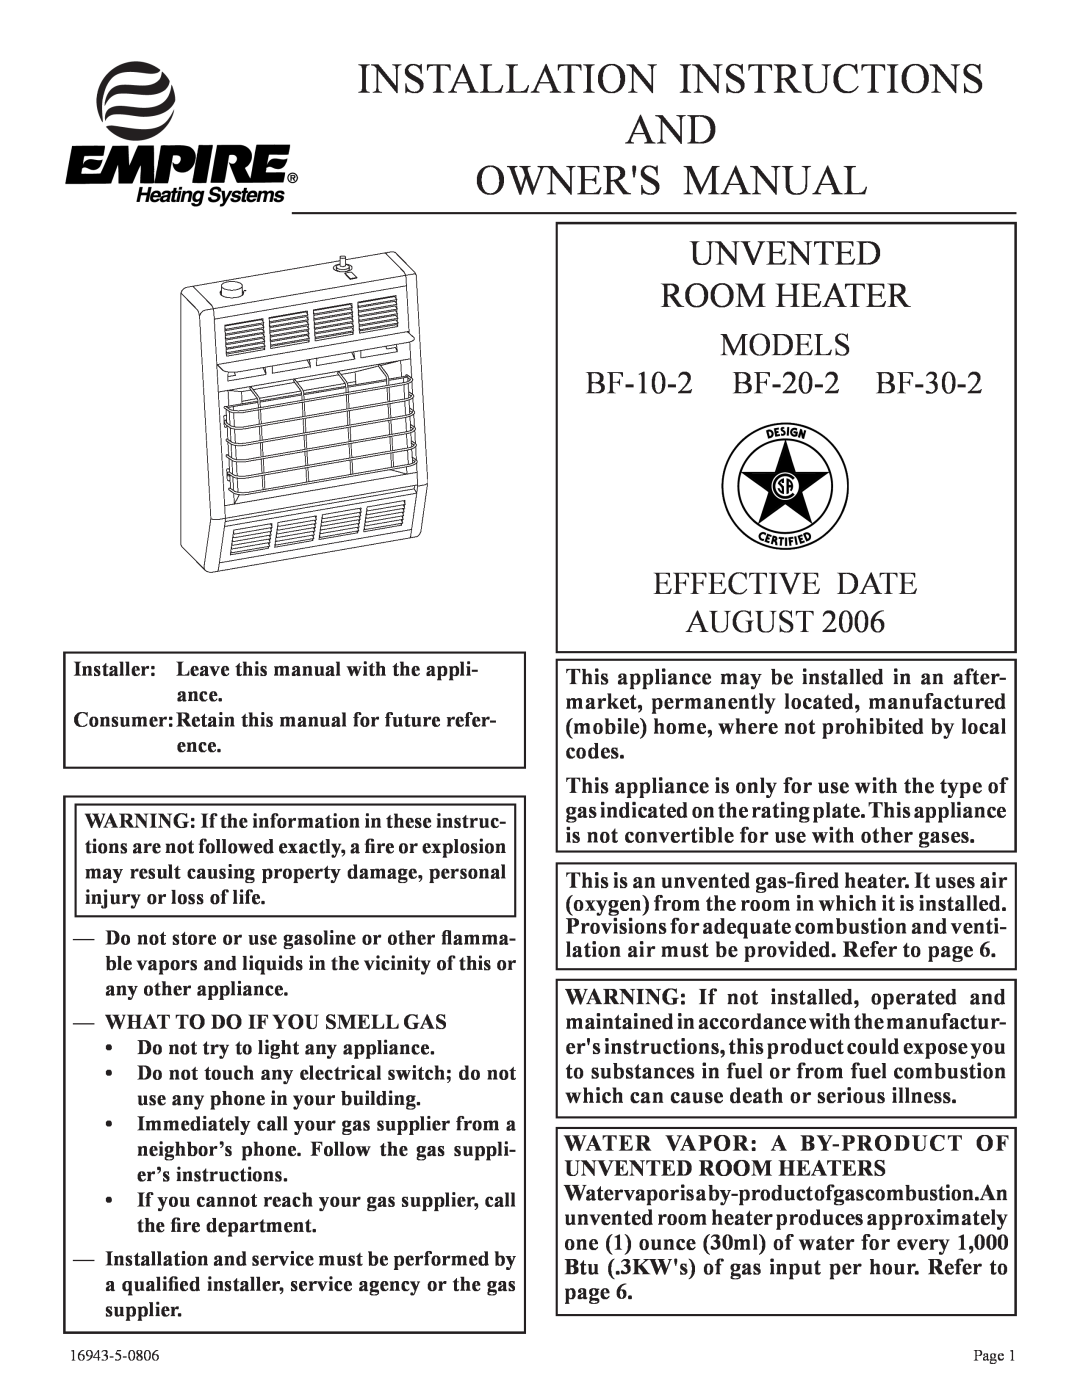 Empire Comfort Systems installation instructions MODELS BF-10-2 BF-20-2 BF-30-2 EFFECTIVE DATE, August 